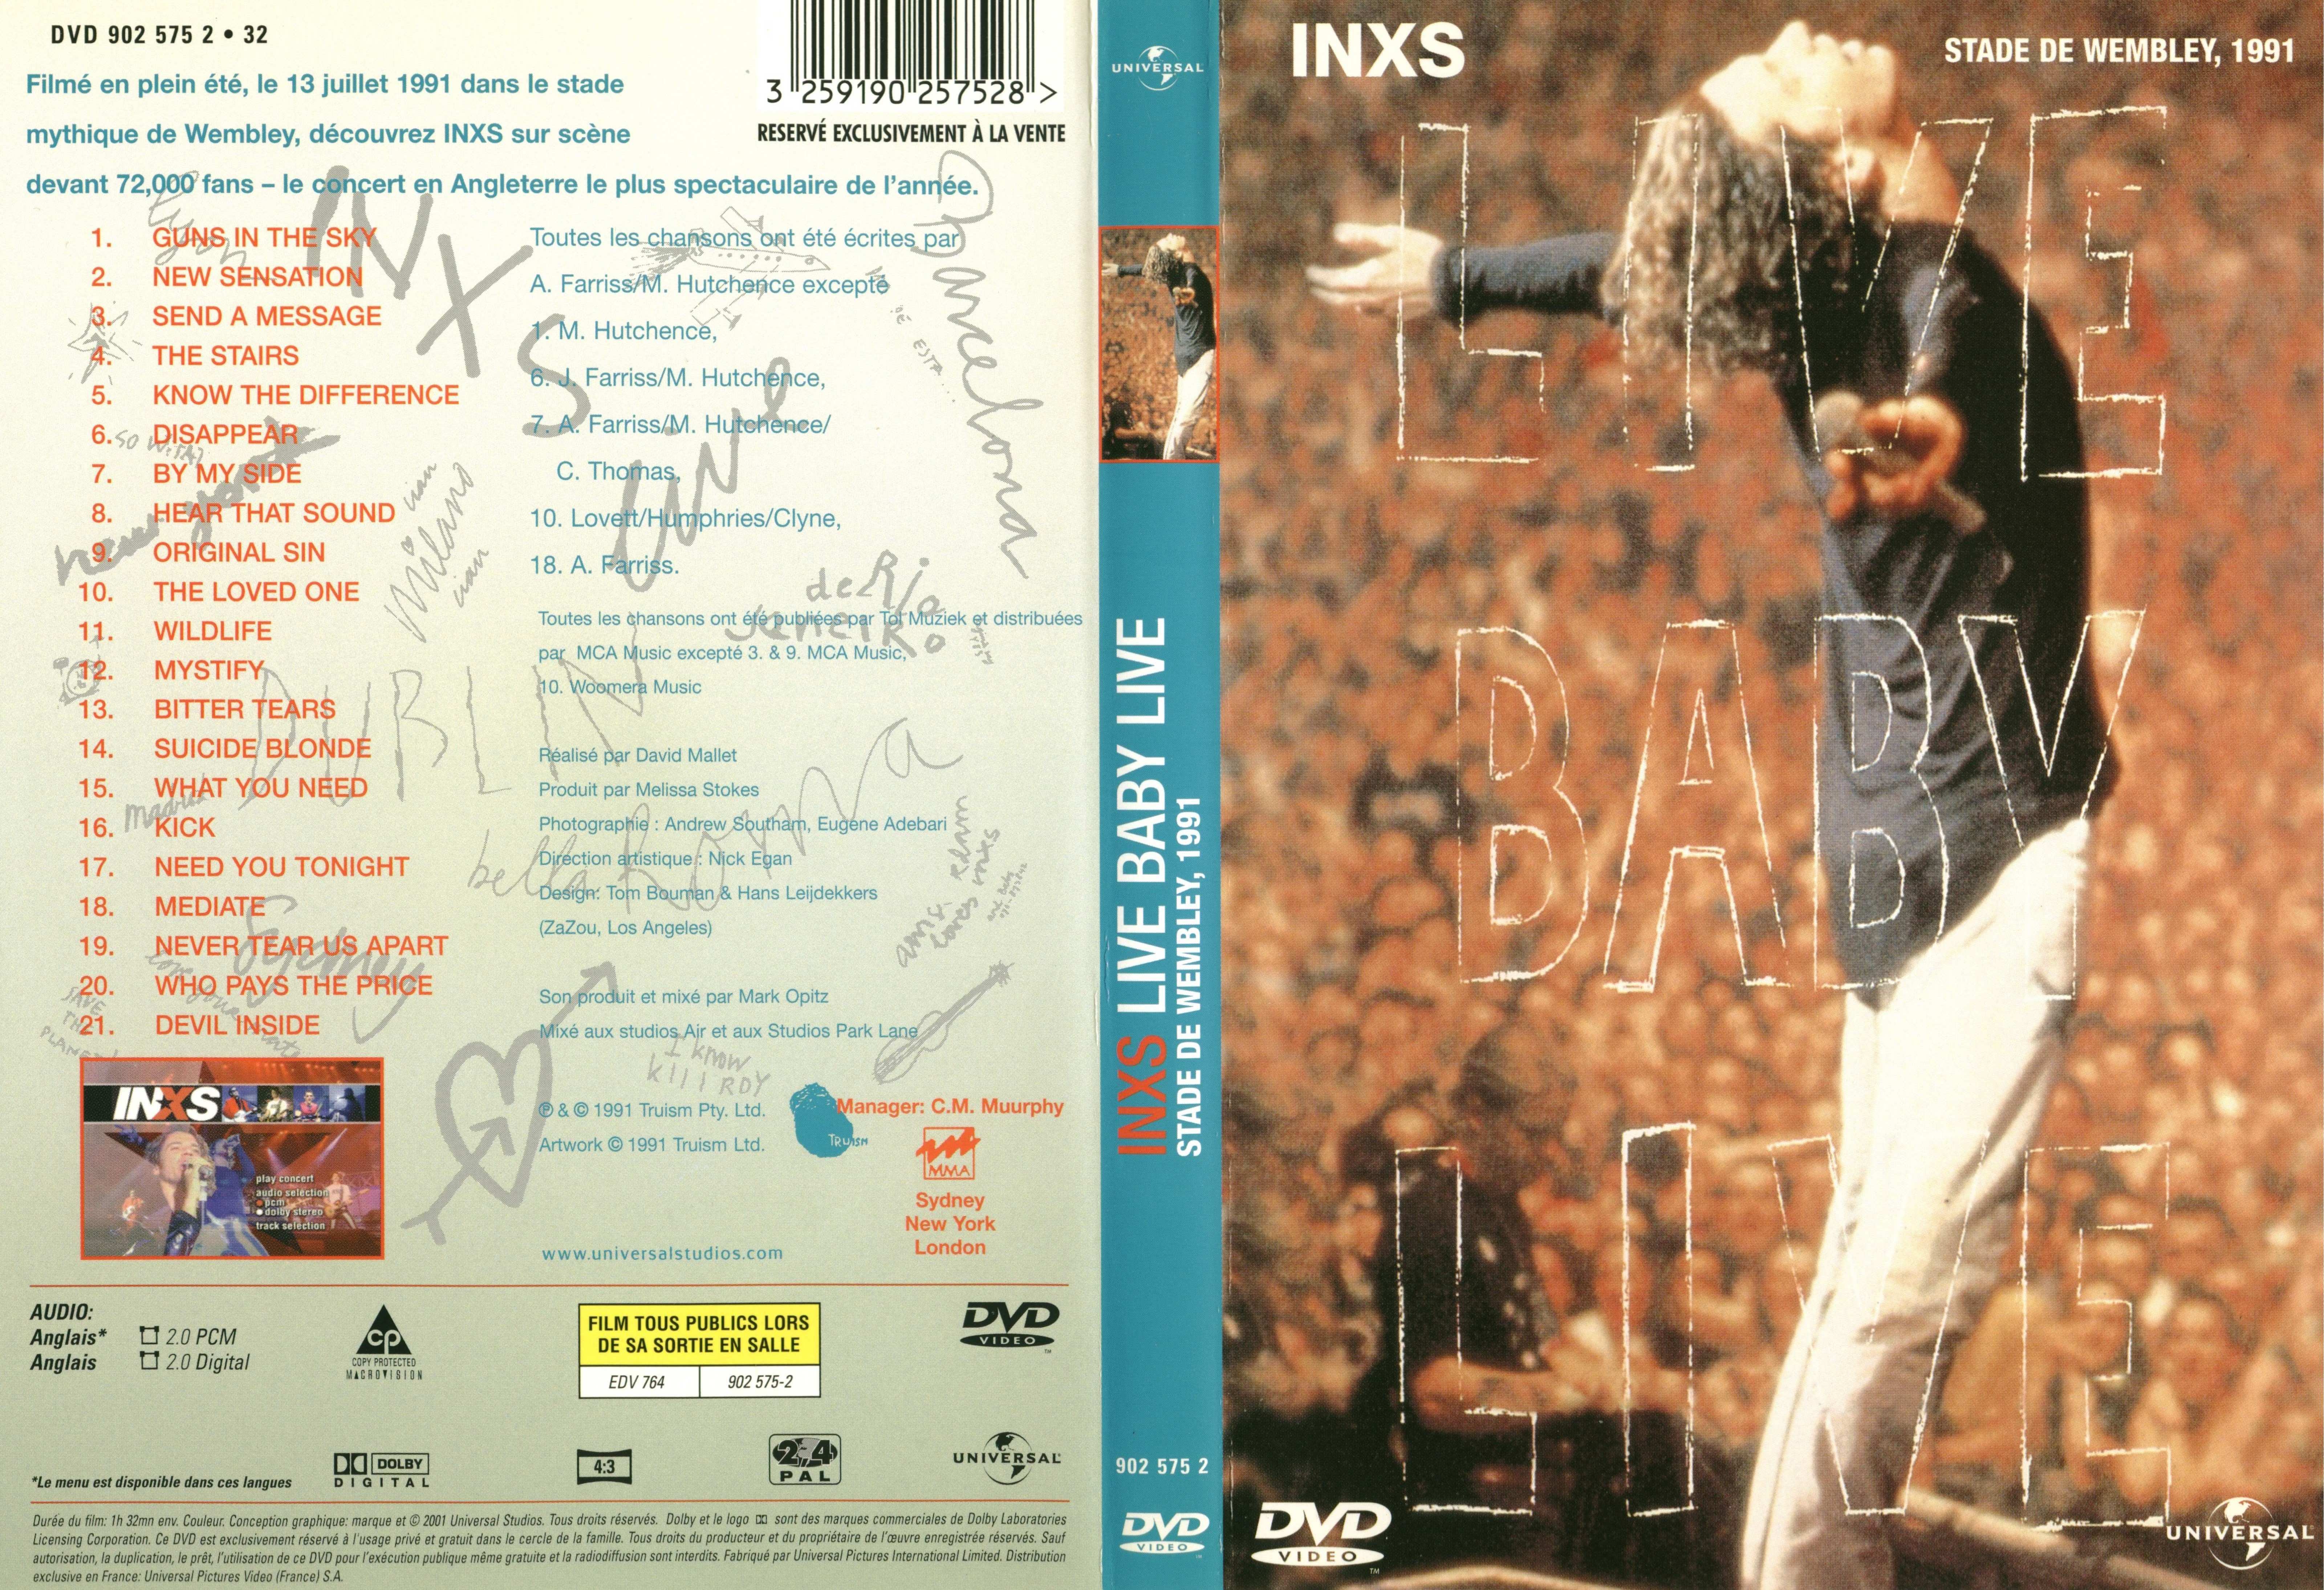 Jaquette DVD INXS - live baby live wembley 1991